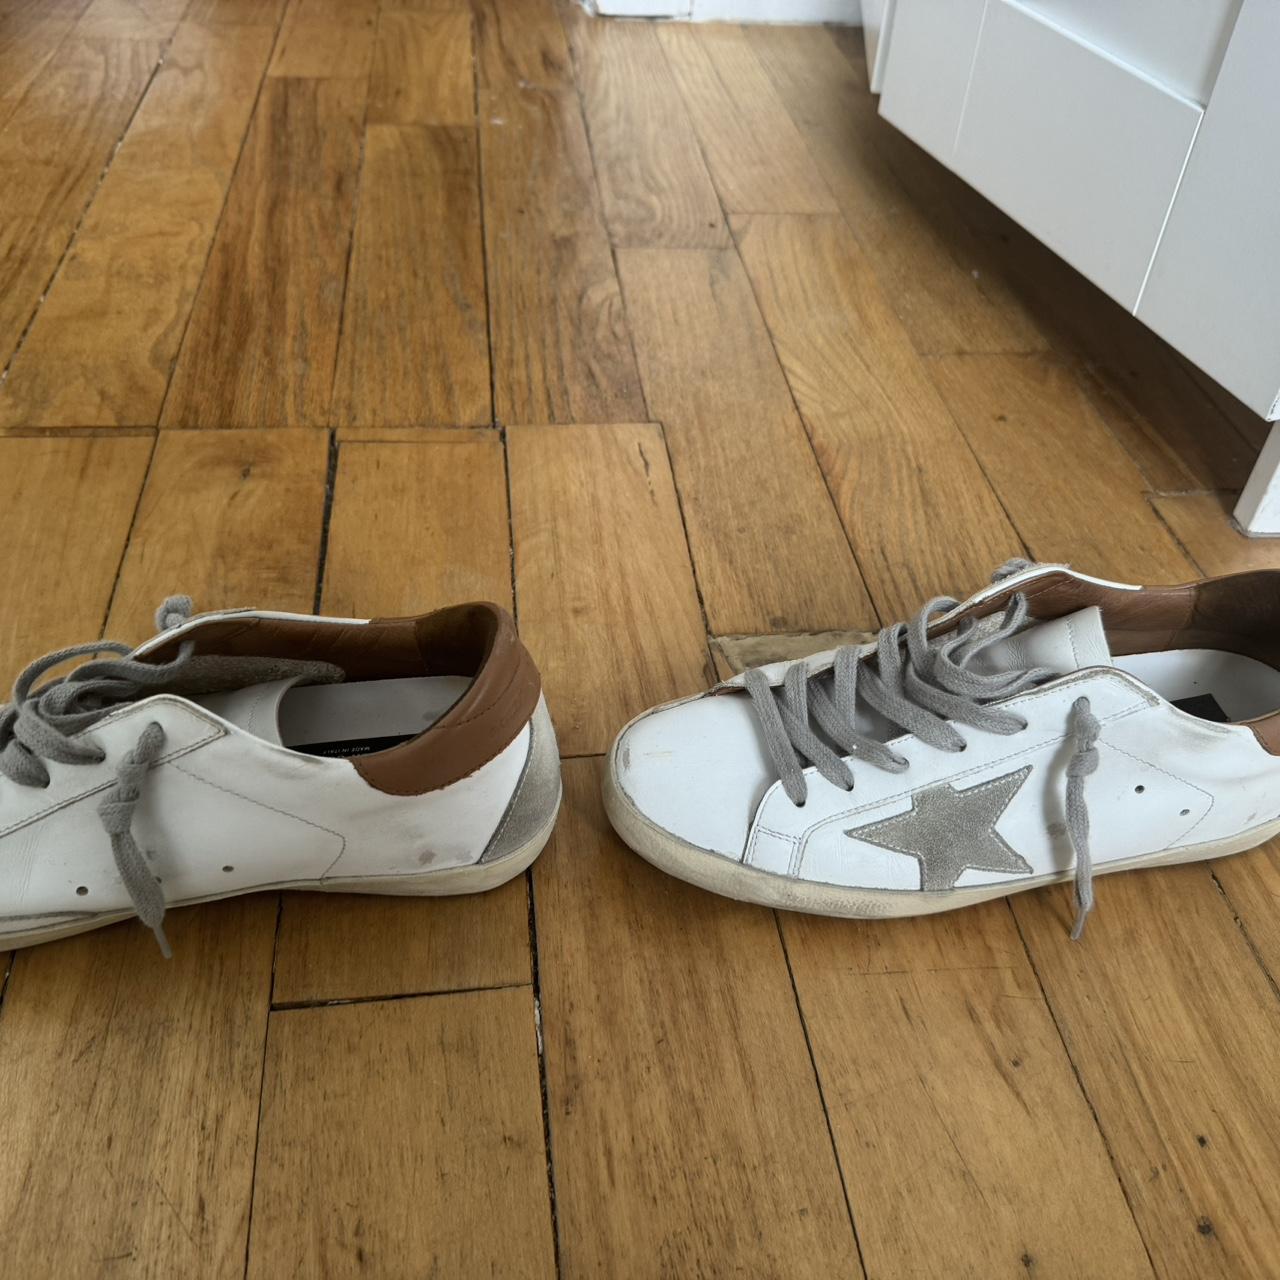 Golden Goose Women's White Trainers (3)